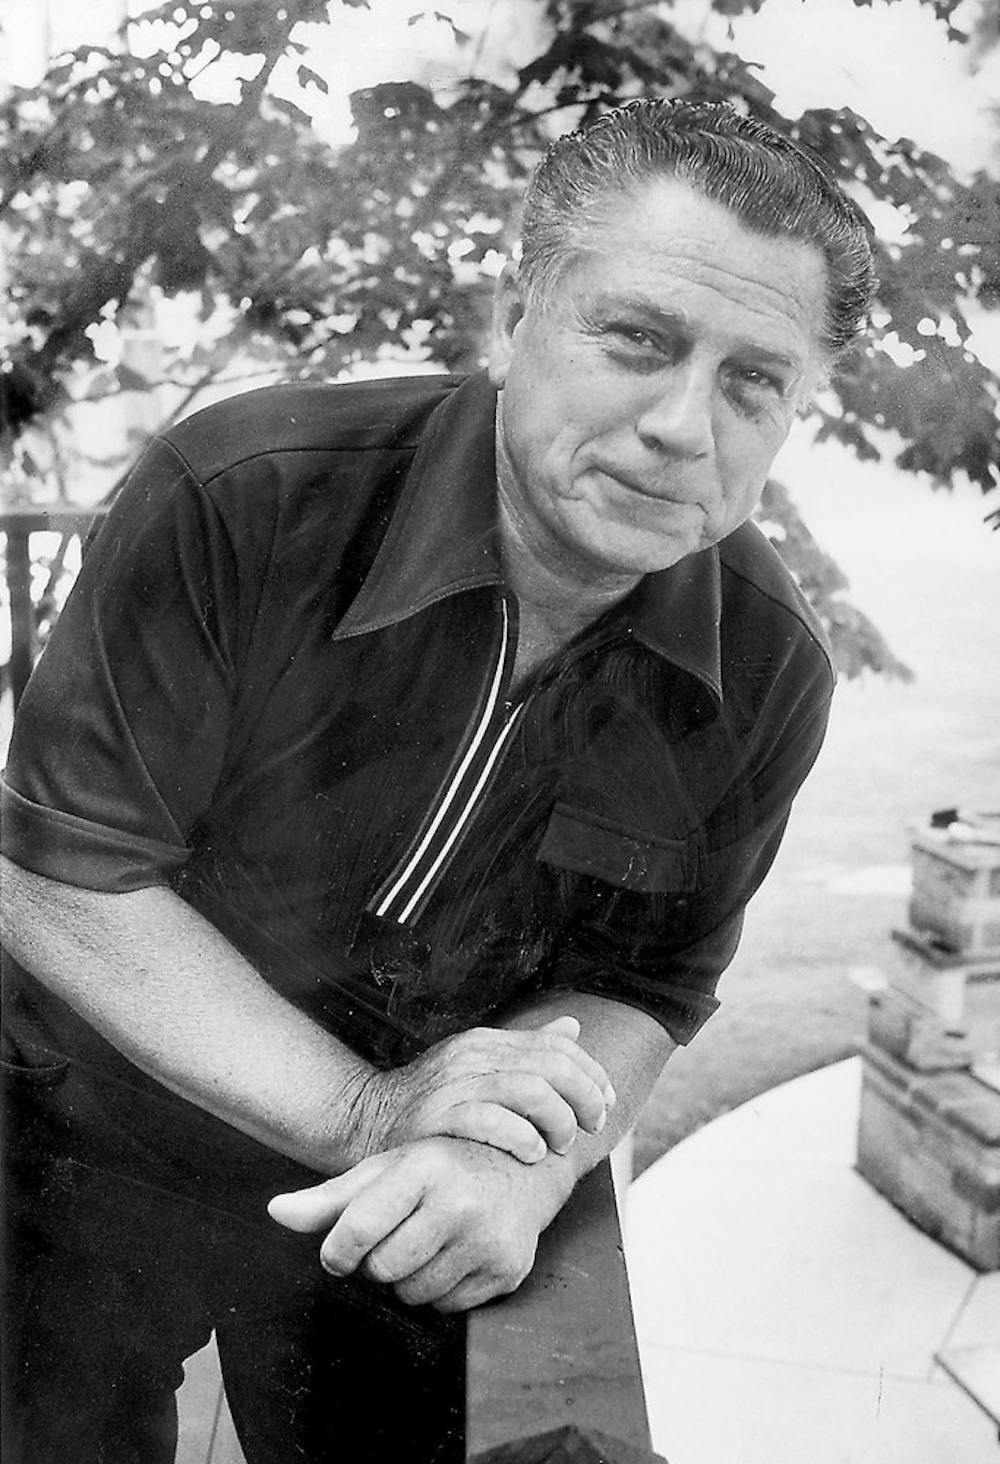 	<p>In this file photo taken on July 24, 1975, Jimmy Hoffa poses for a photo. Police will be taking soil core samples at a home in Roseville, Michigan, in search of the remains of the missing Teamsters boss. (Tony Spina/Detroit Free Press/MCT)</p>